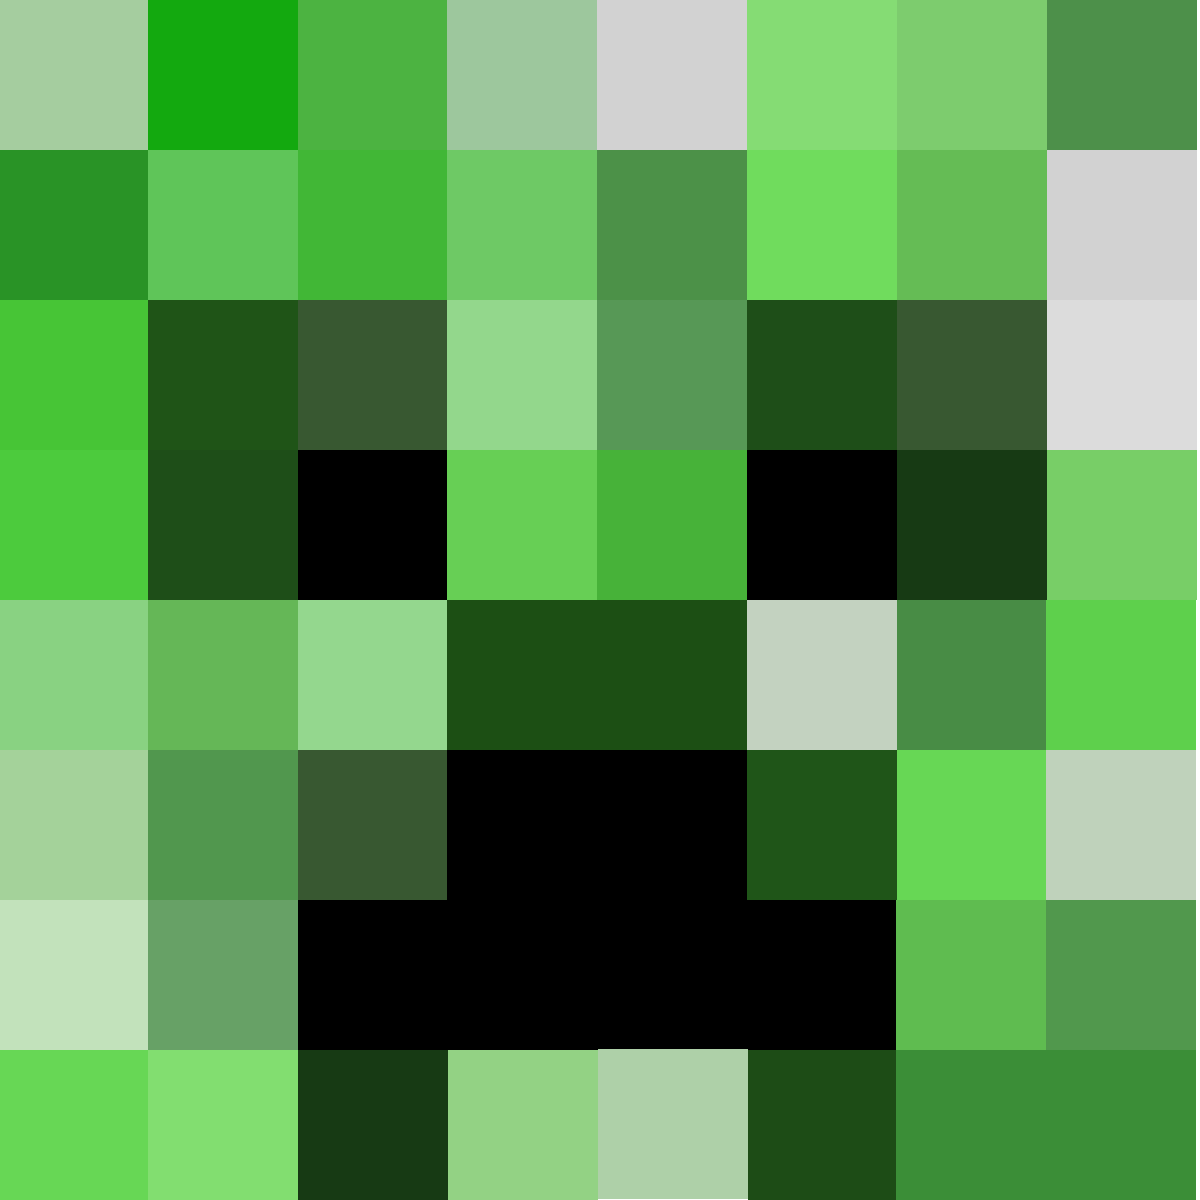 szymonwastaken's Profile Picture on PvPRP